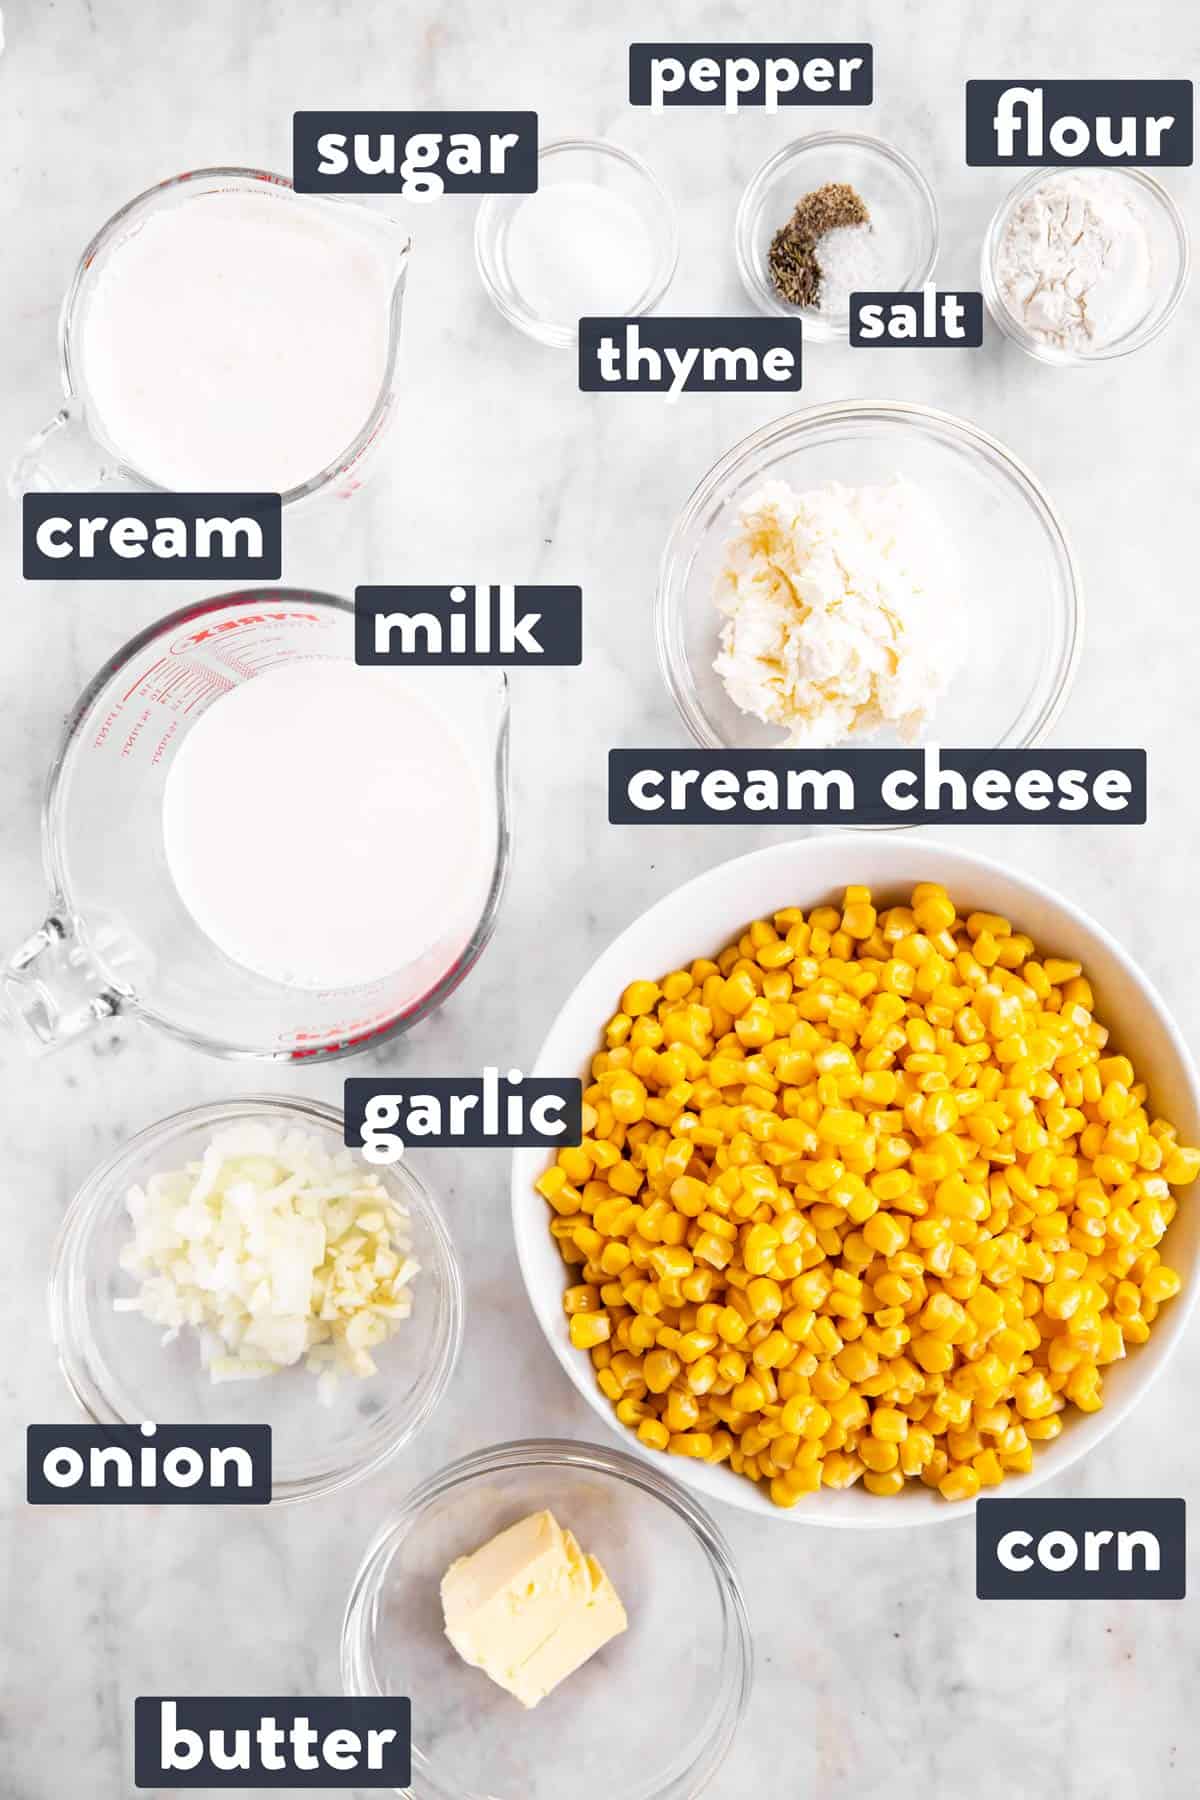 ingredients for creamed corn with text labels